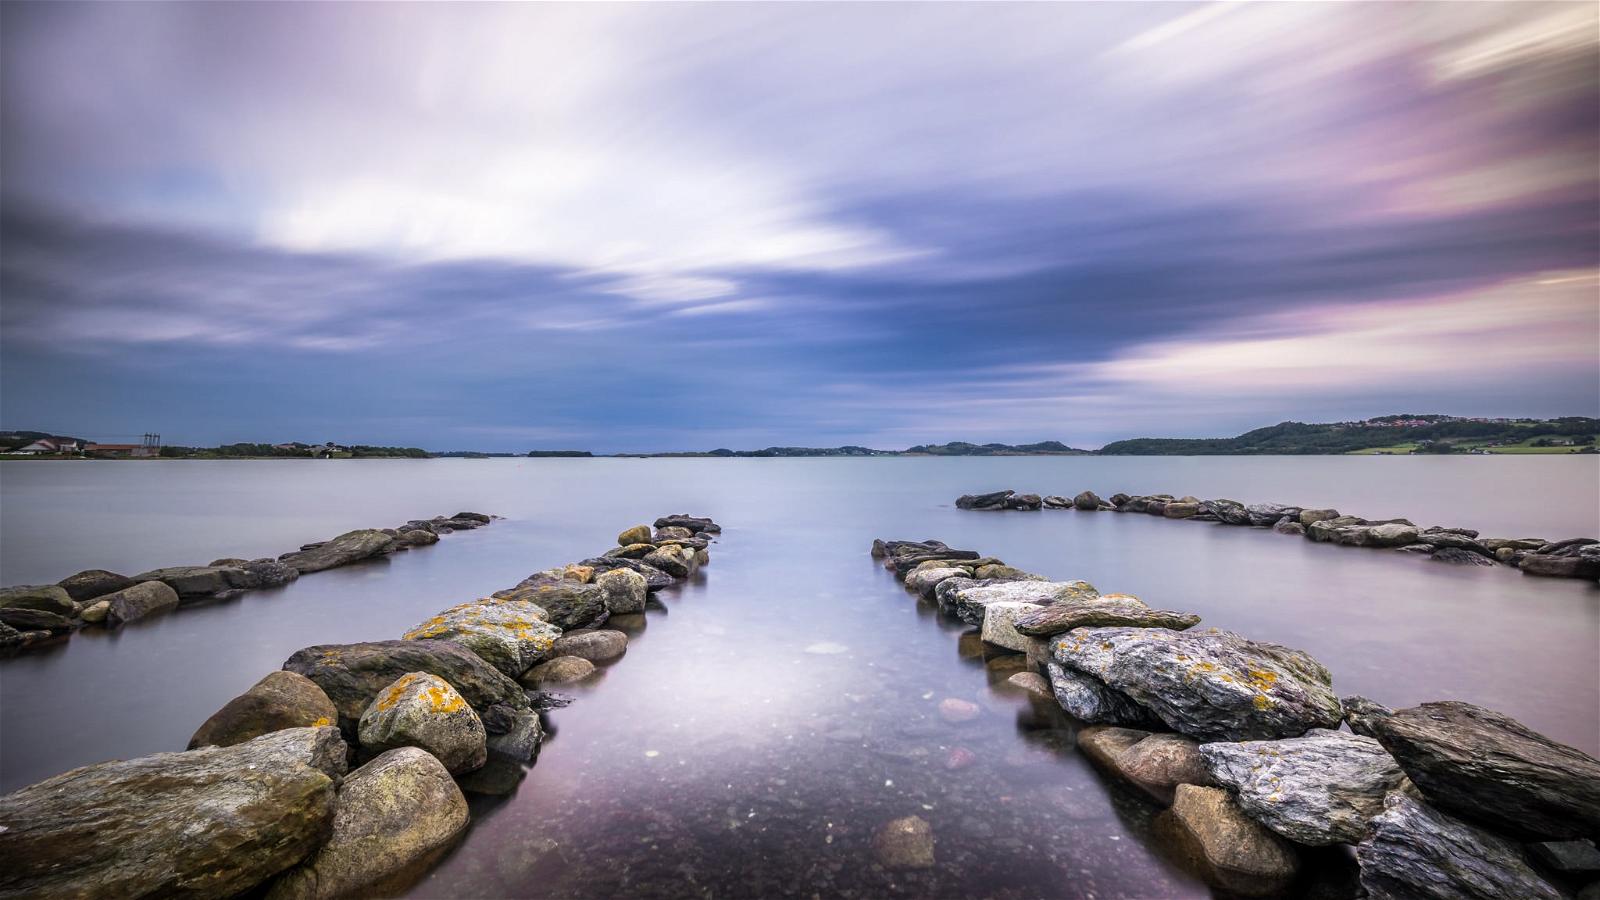 Image of Hafrsfjord. longexposure travel sunset sea sky seascape motion water weather norway clouds reflections landscape geotagged photography stavanger photo hafrsfjord rocks europe no sony fjord fullframe onsale ultrawide a7 rogaland bythesea sonya7 sonyfe1635